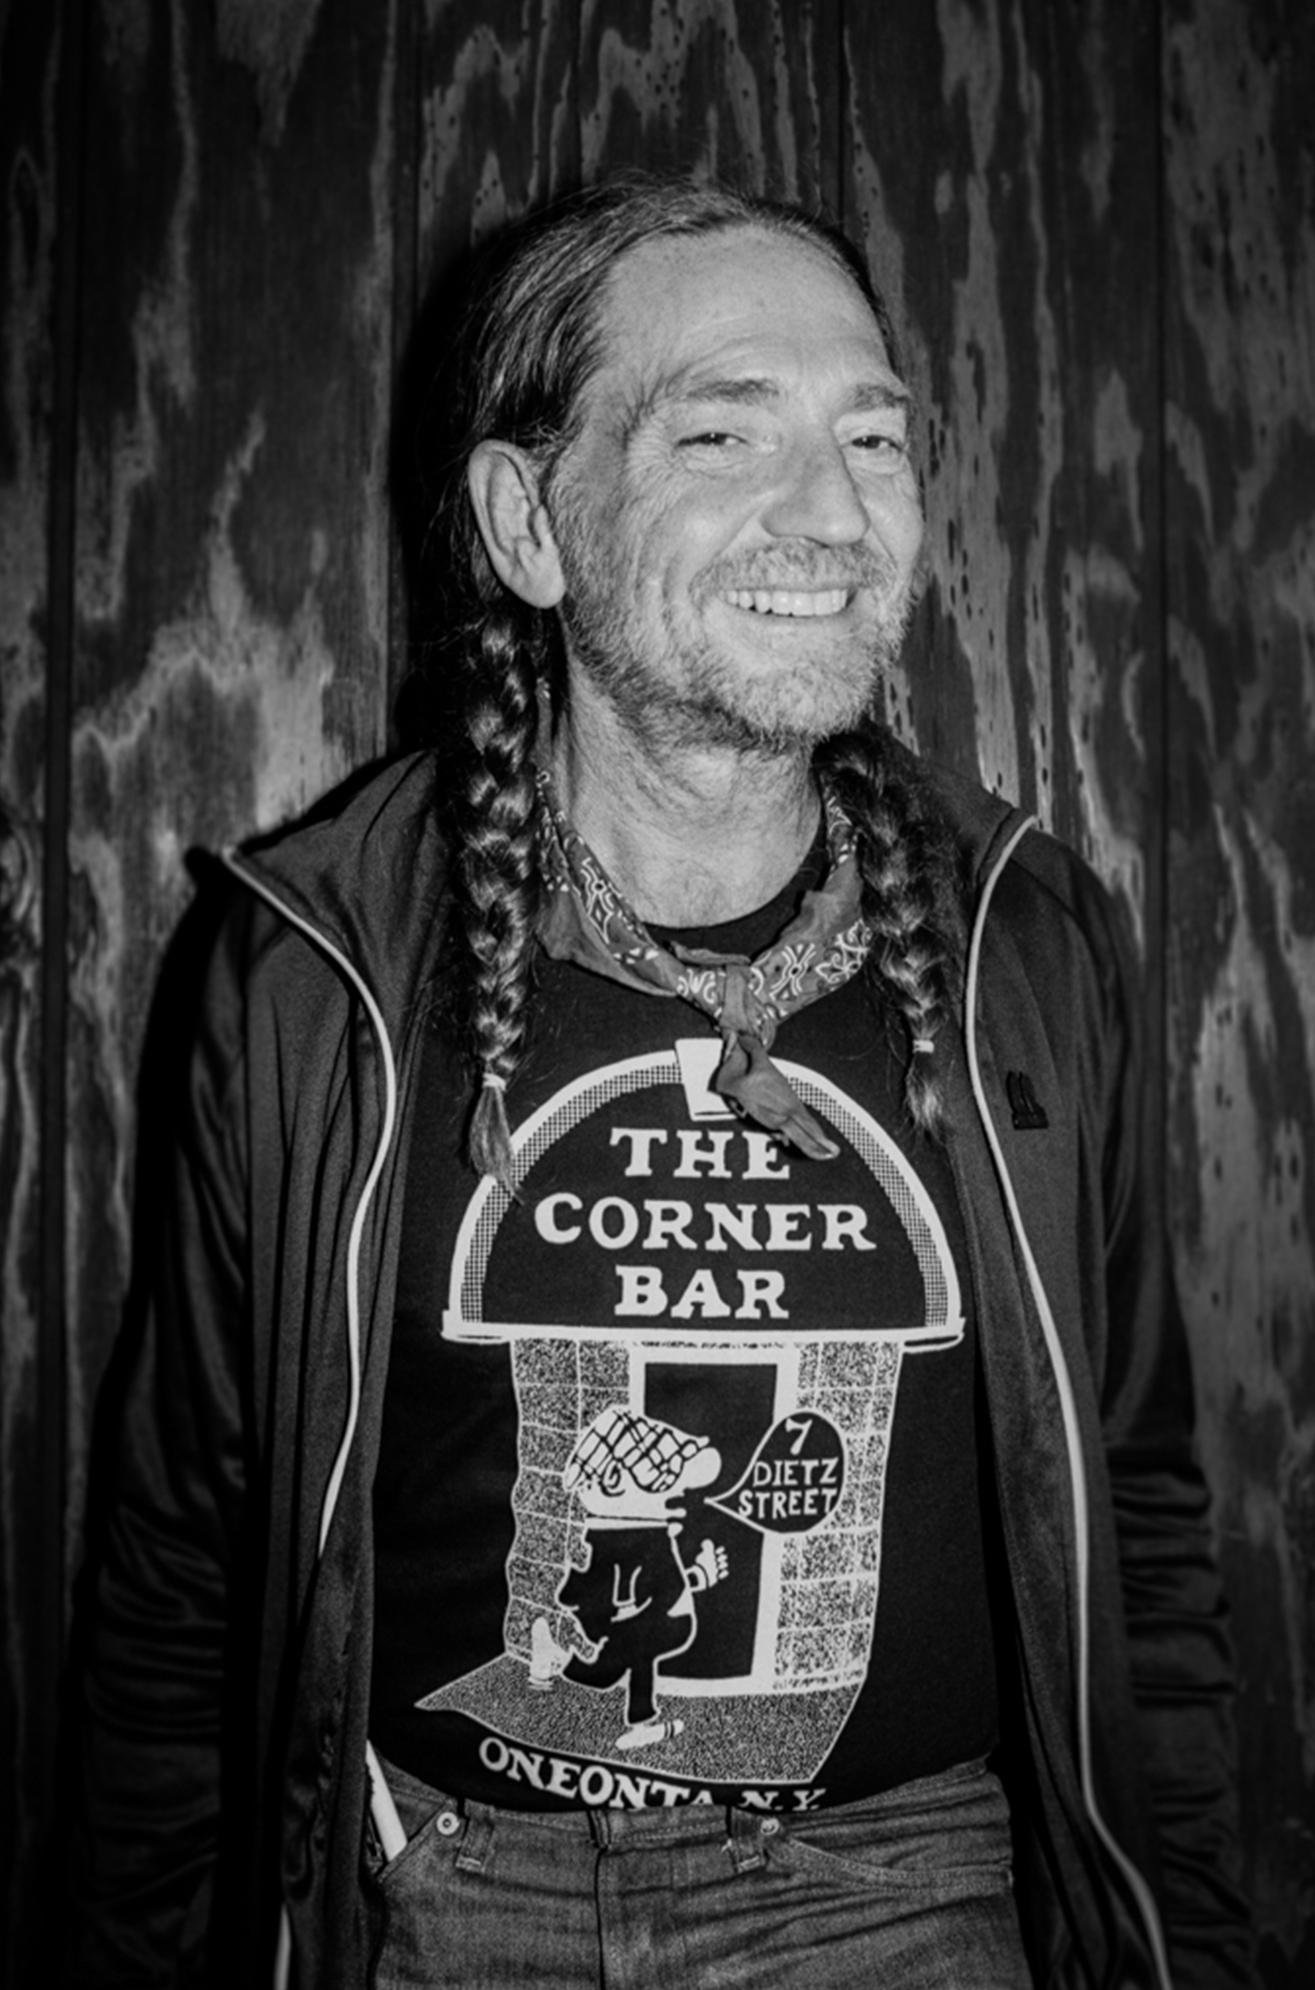 Signed limited edition 20x24"" print of Willie Nelson taken in 1978 by Lynn Goldsmith.

Limited edition number 5/20

Modern C-type print. Available for immediate shipping.

Lynn Goldsmith has documented over five decades of American culture,